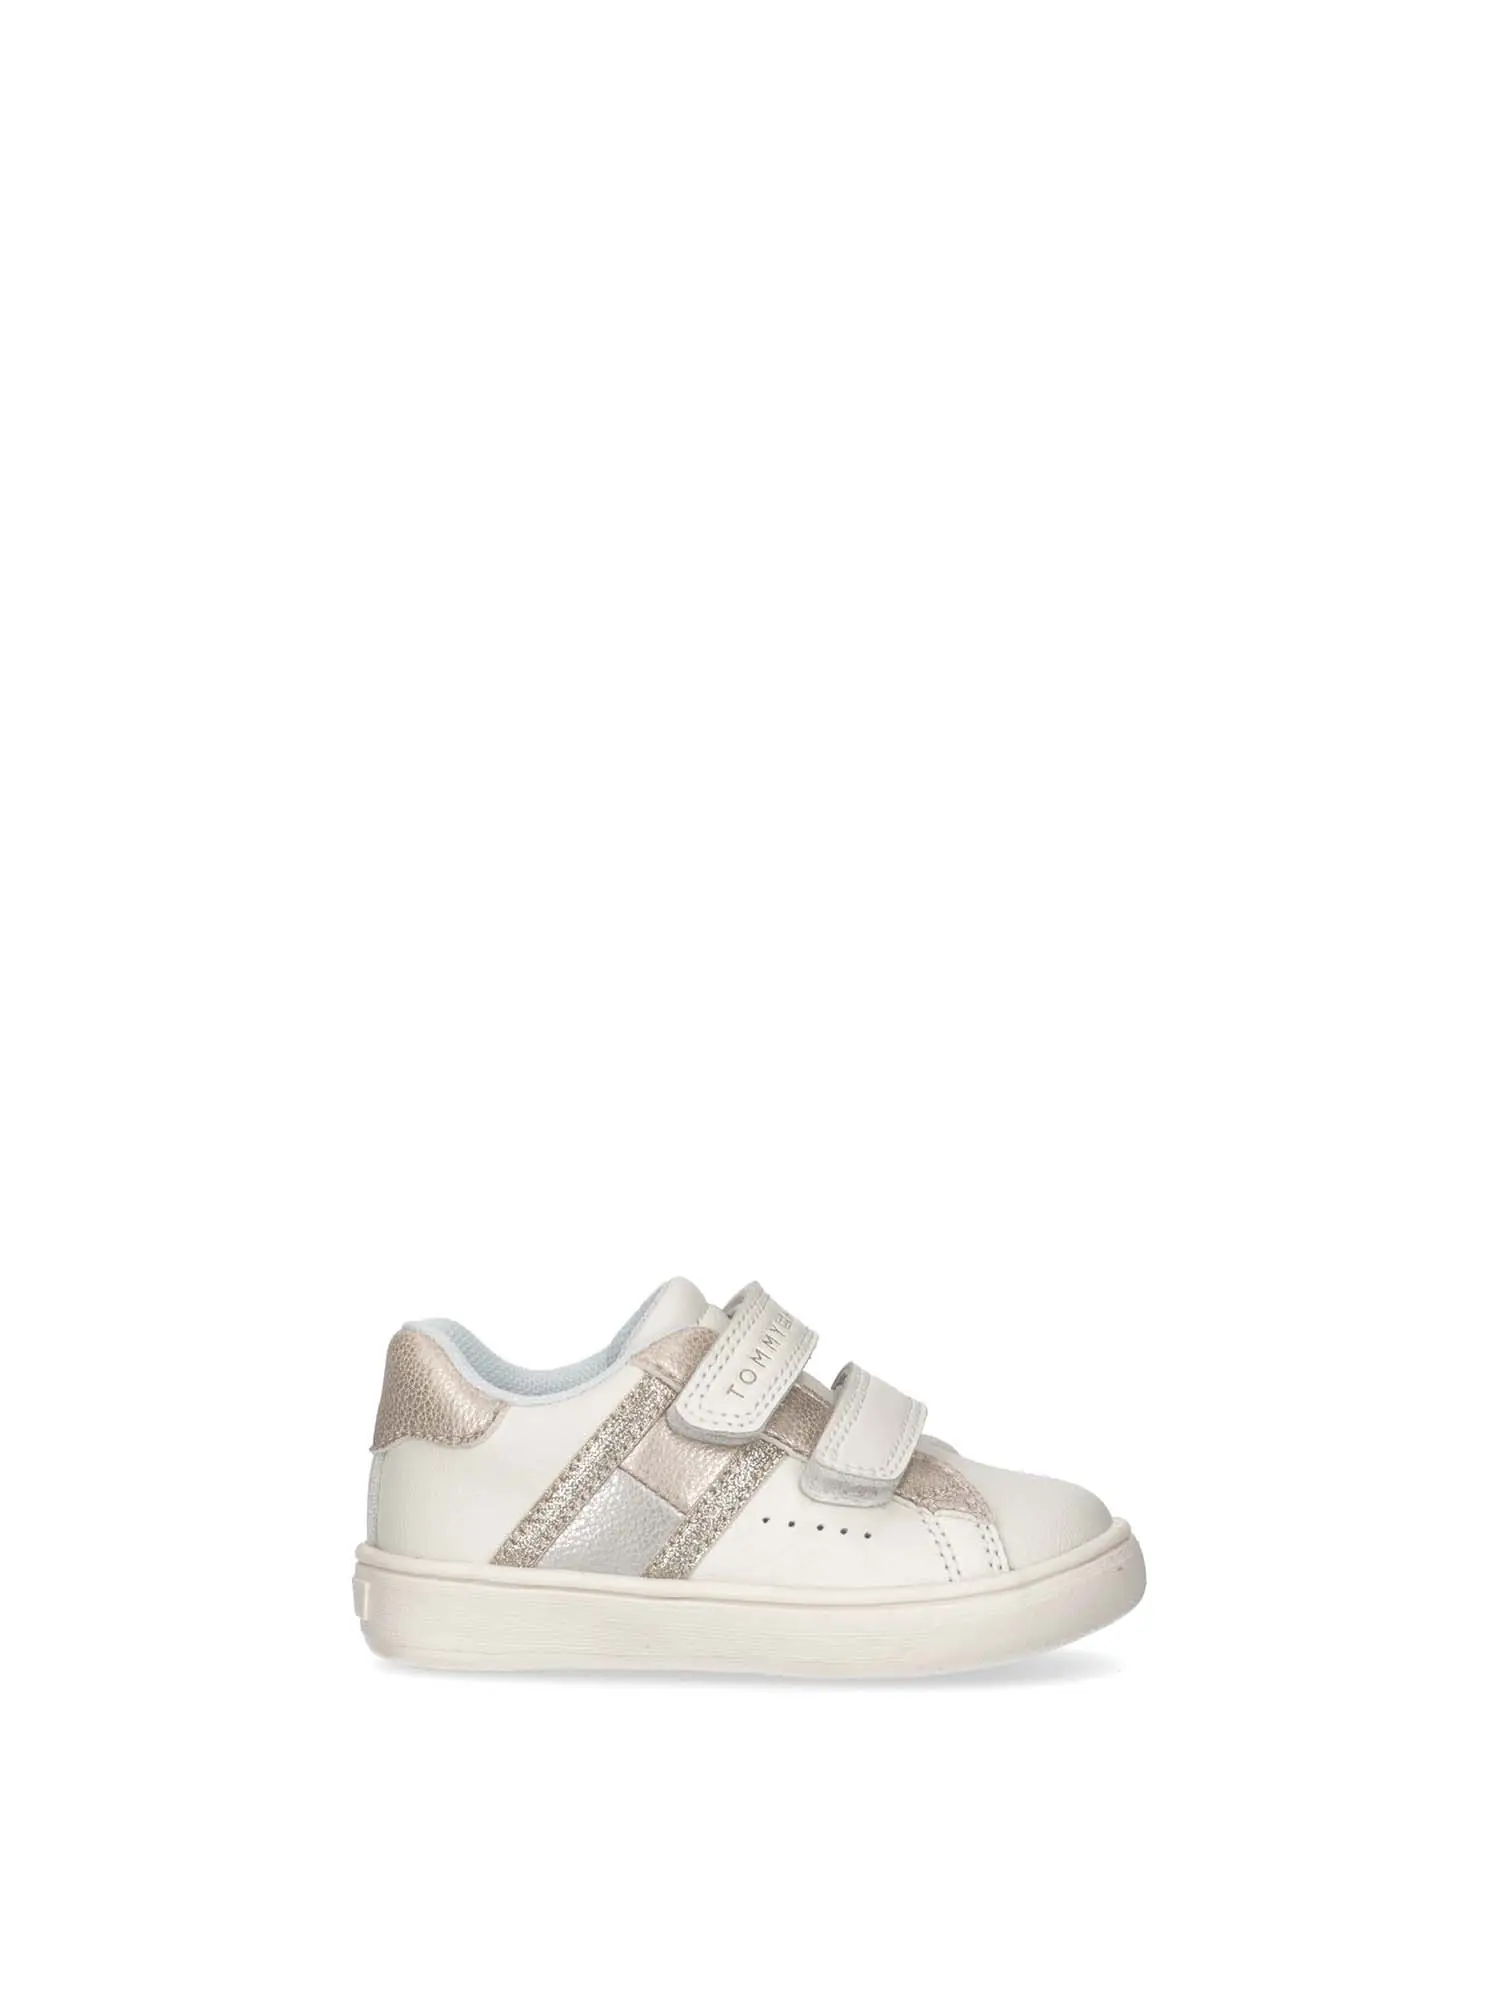 SNEAKERS BAMBINA - TOMMY HILFIGER - T1A9-33190-1439 - BIANCO/PLATINO, 27